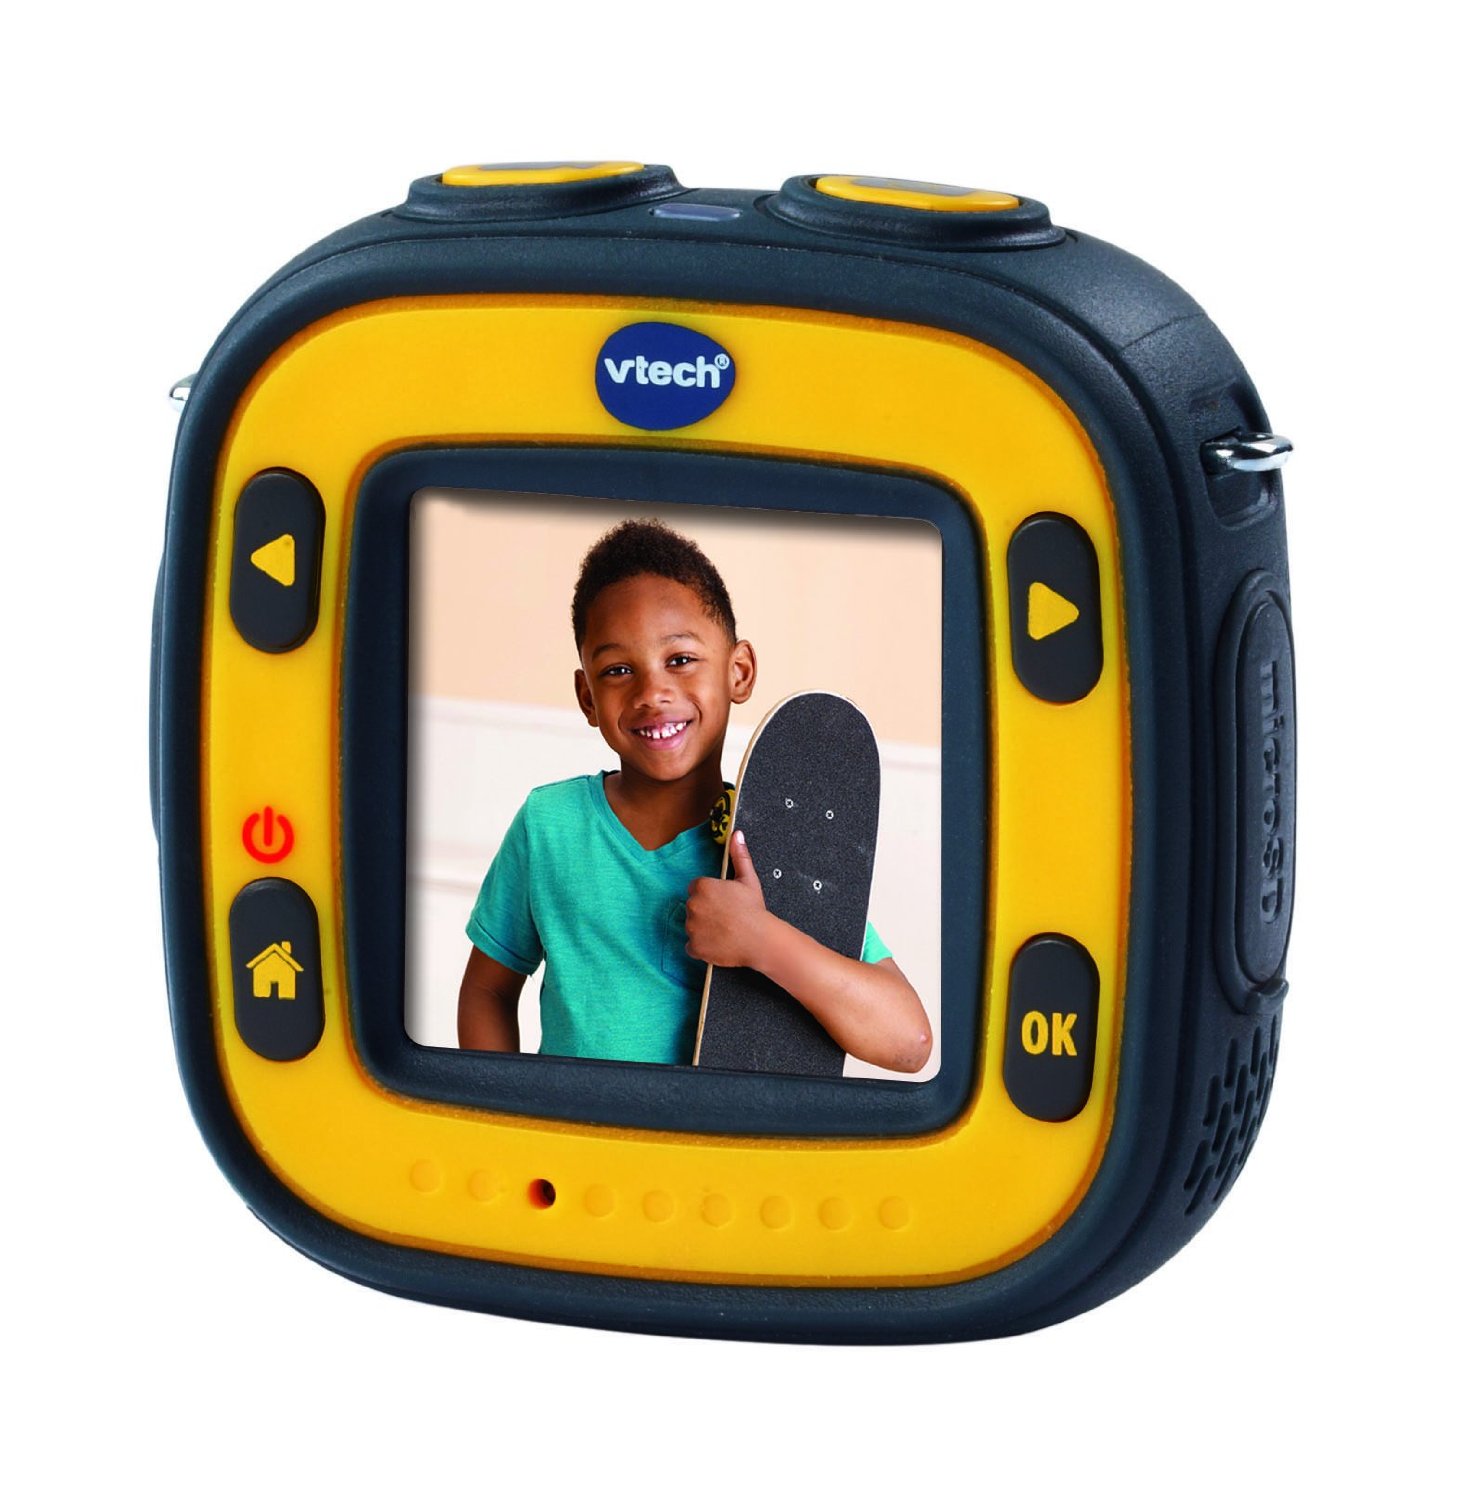 VTech Kidizoom Action Cam, Yellow/Black